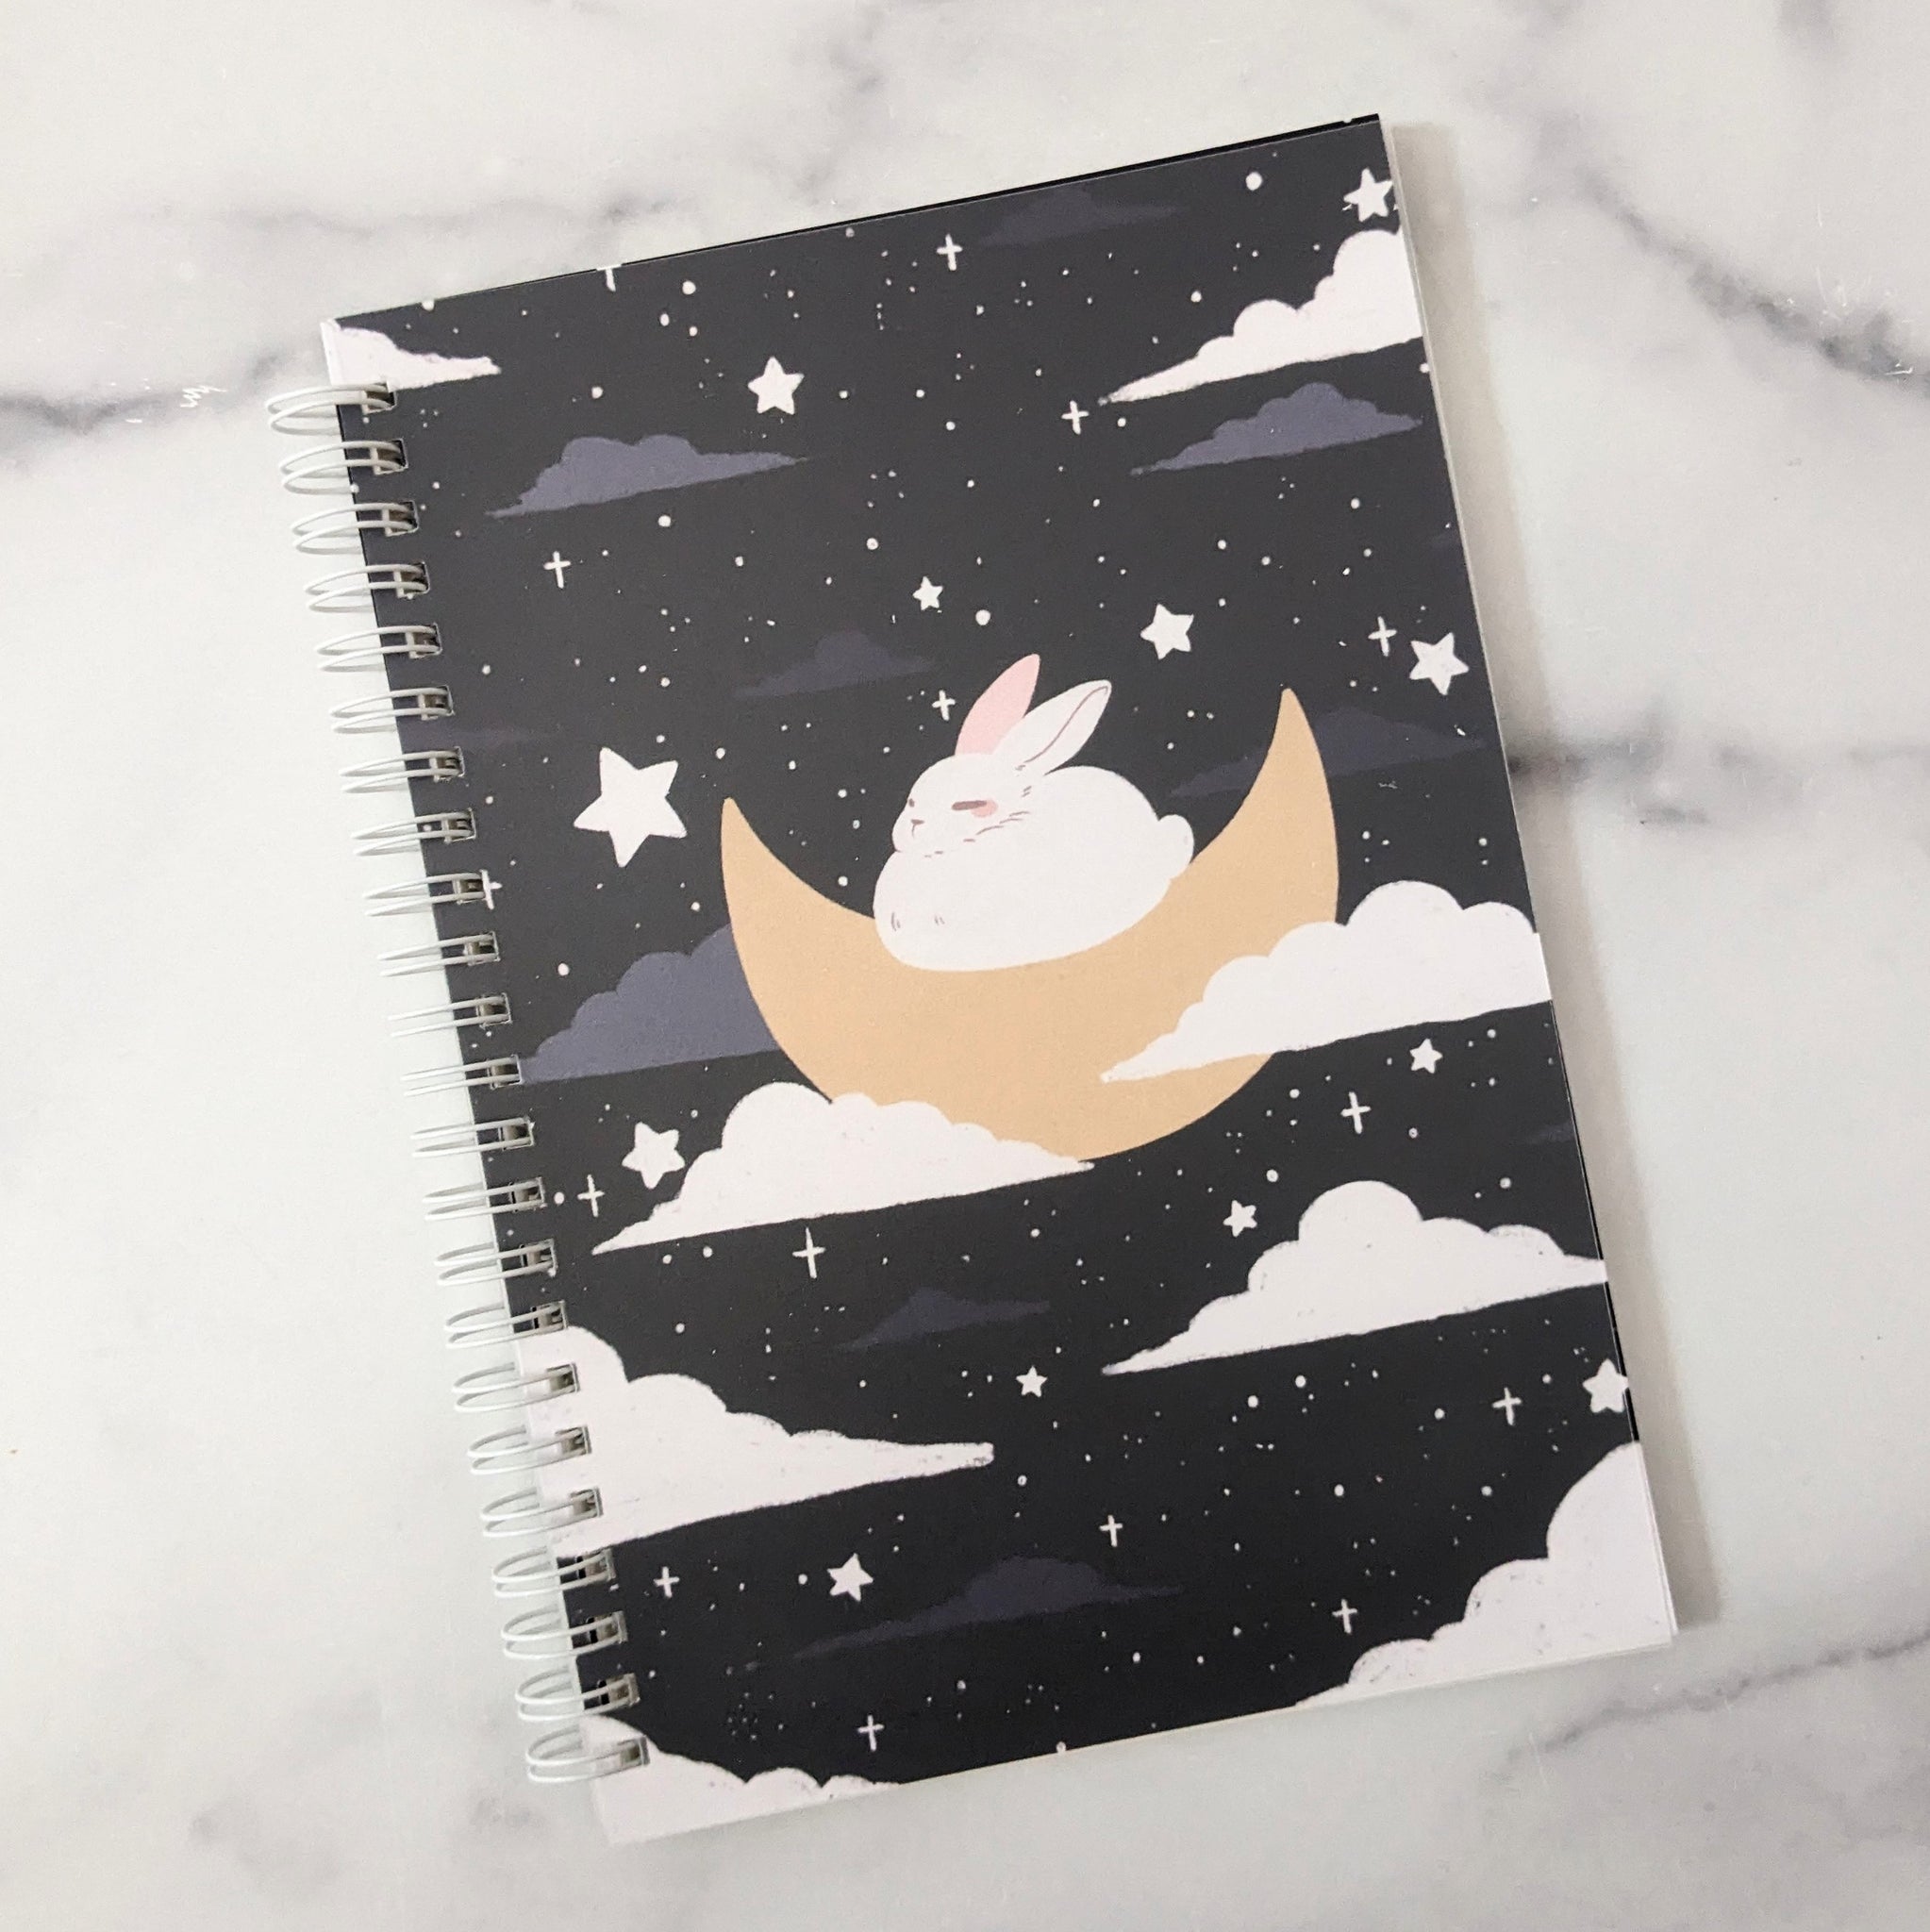 Bunny on the Moon Spiral Stickerbook